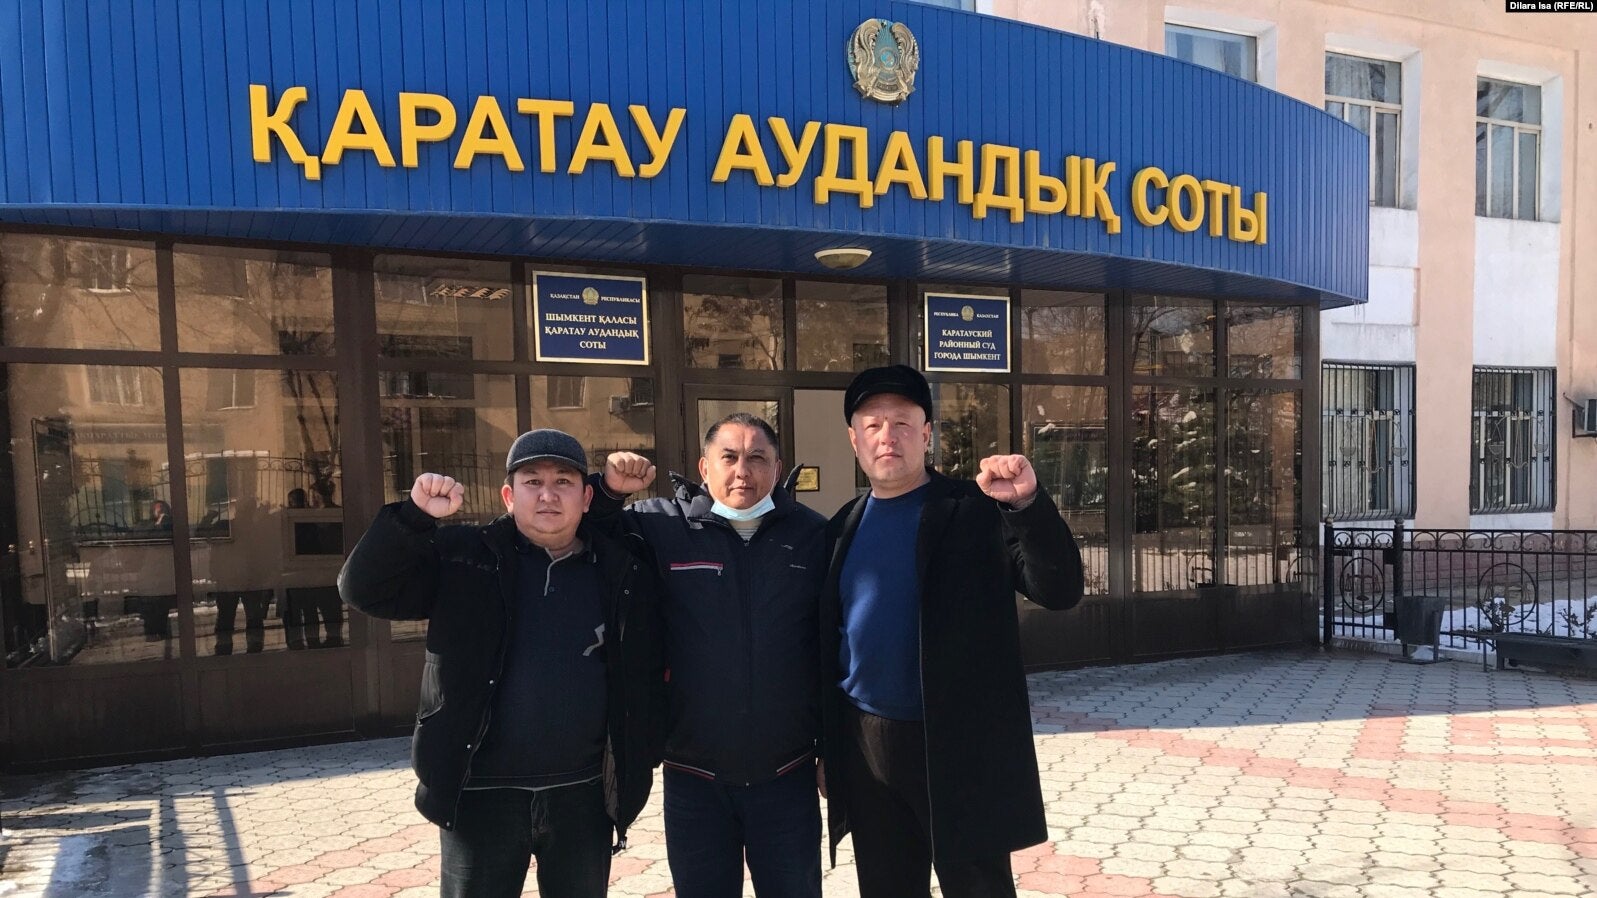 Erlan Faizullaev, Nurzhan Abildaev, and Zhanmurat Ashtaev outside the court in Shymkent, Kazakhstan, where they were on trial on criminal charges under article 405, February 26, 2021.